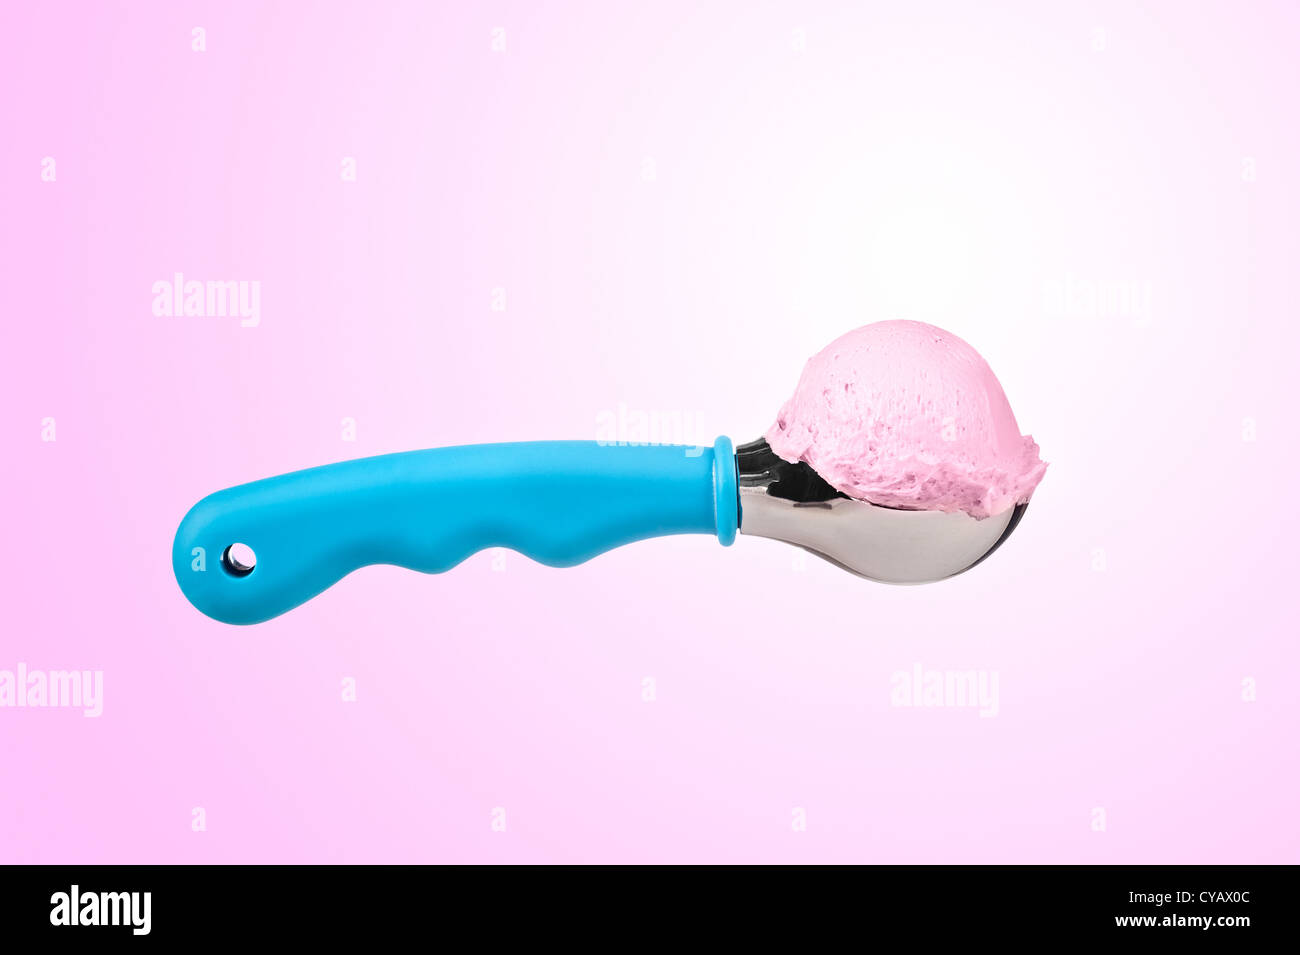 A delicious scoop of ice cream against a decorative pink and white background. Stock Photo